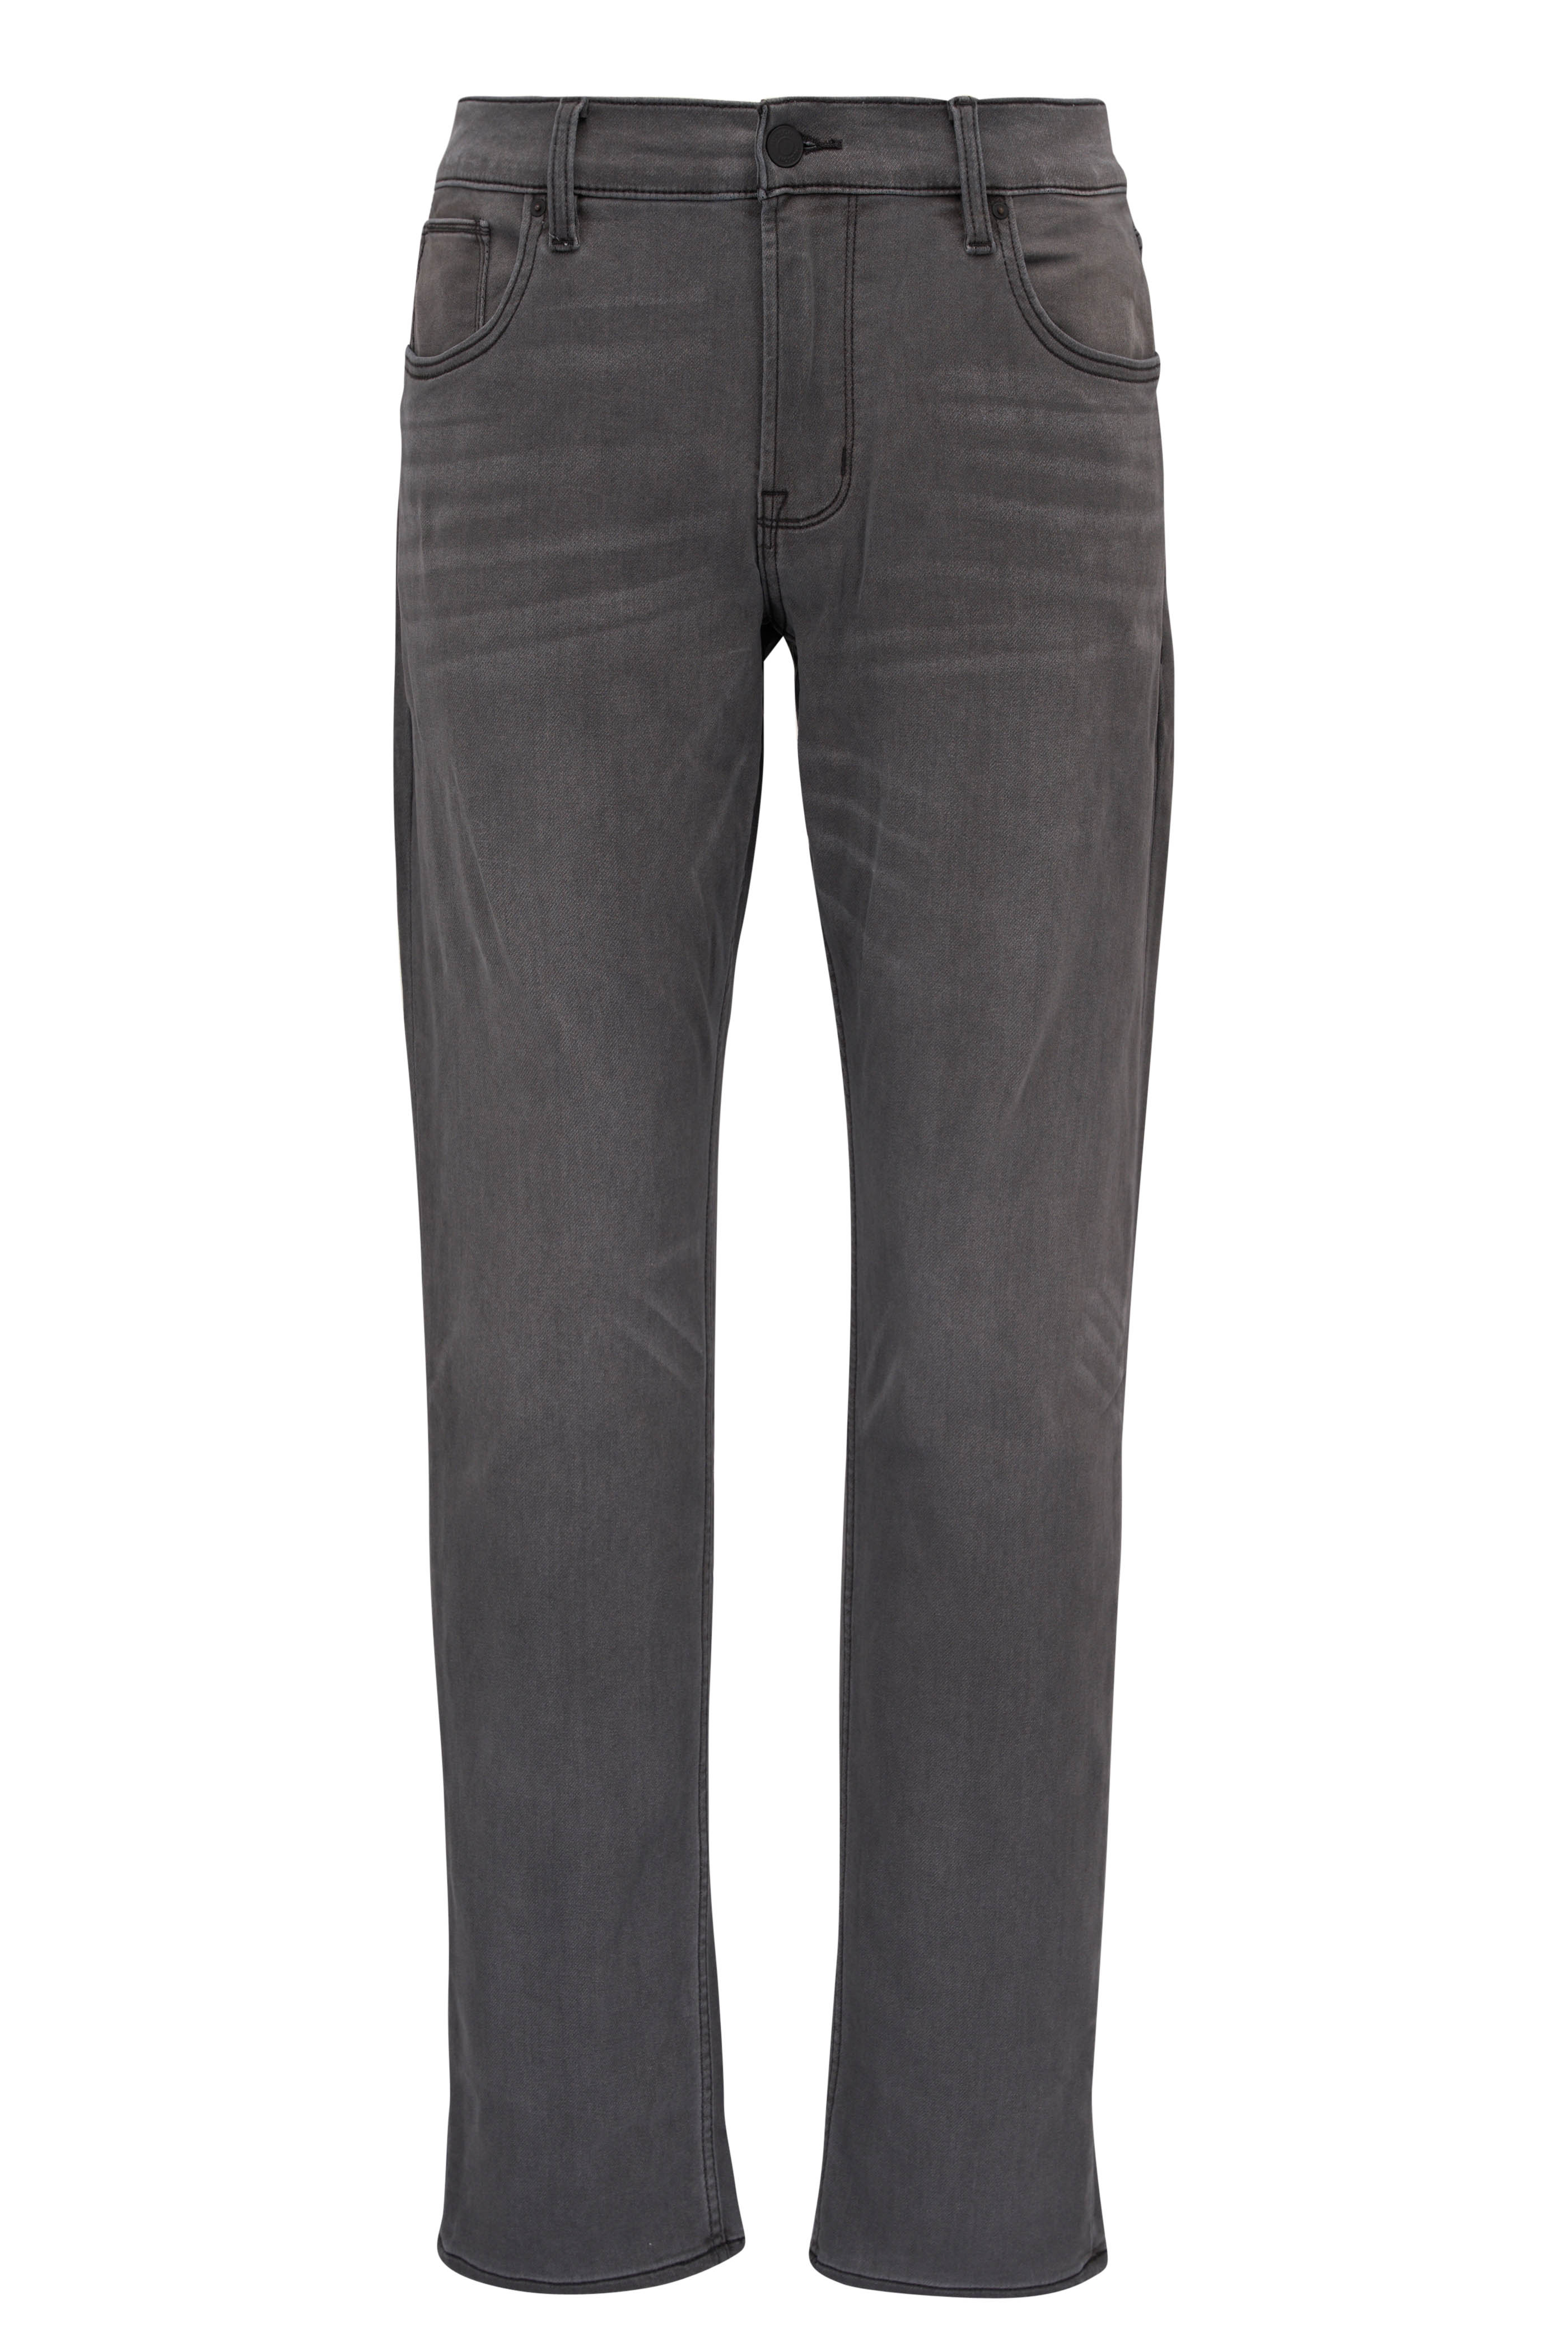 Frame - L'Homme Baltic Slim Fit Mid-Rise Jean | Mitchell Stores